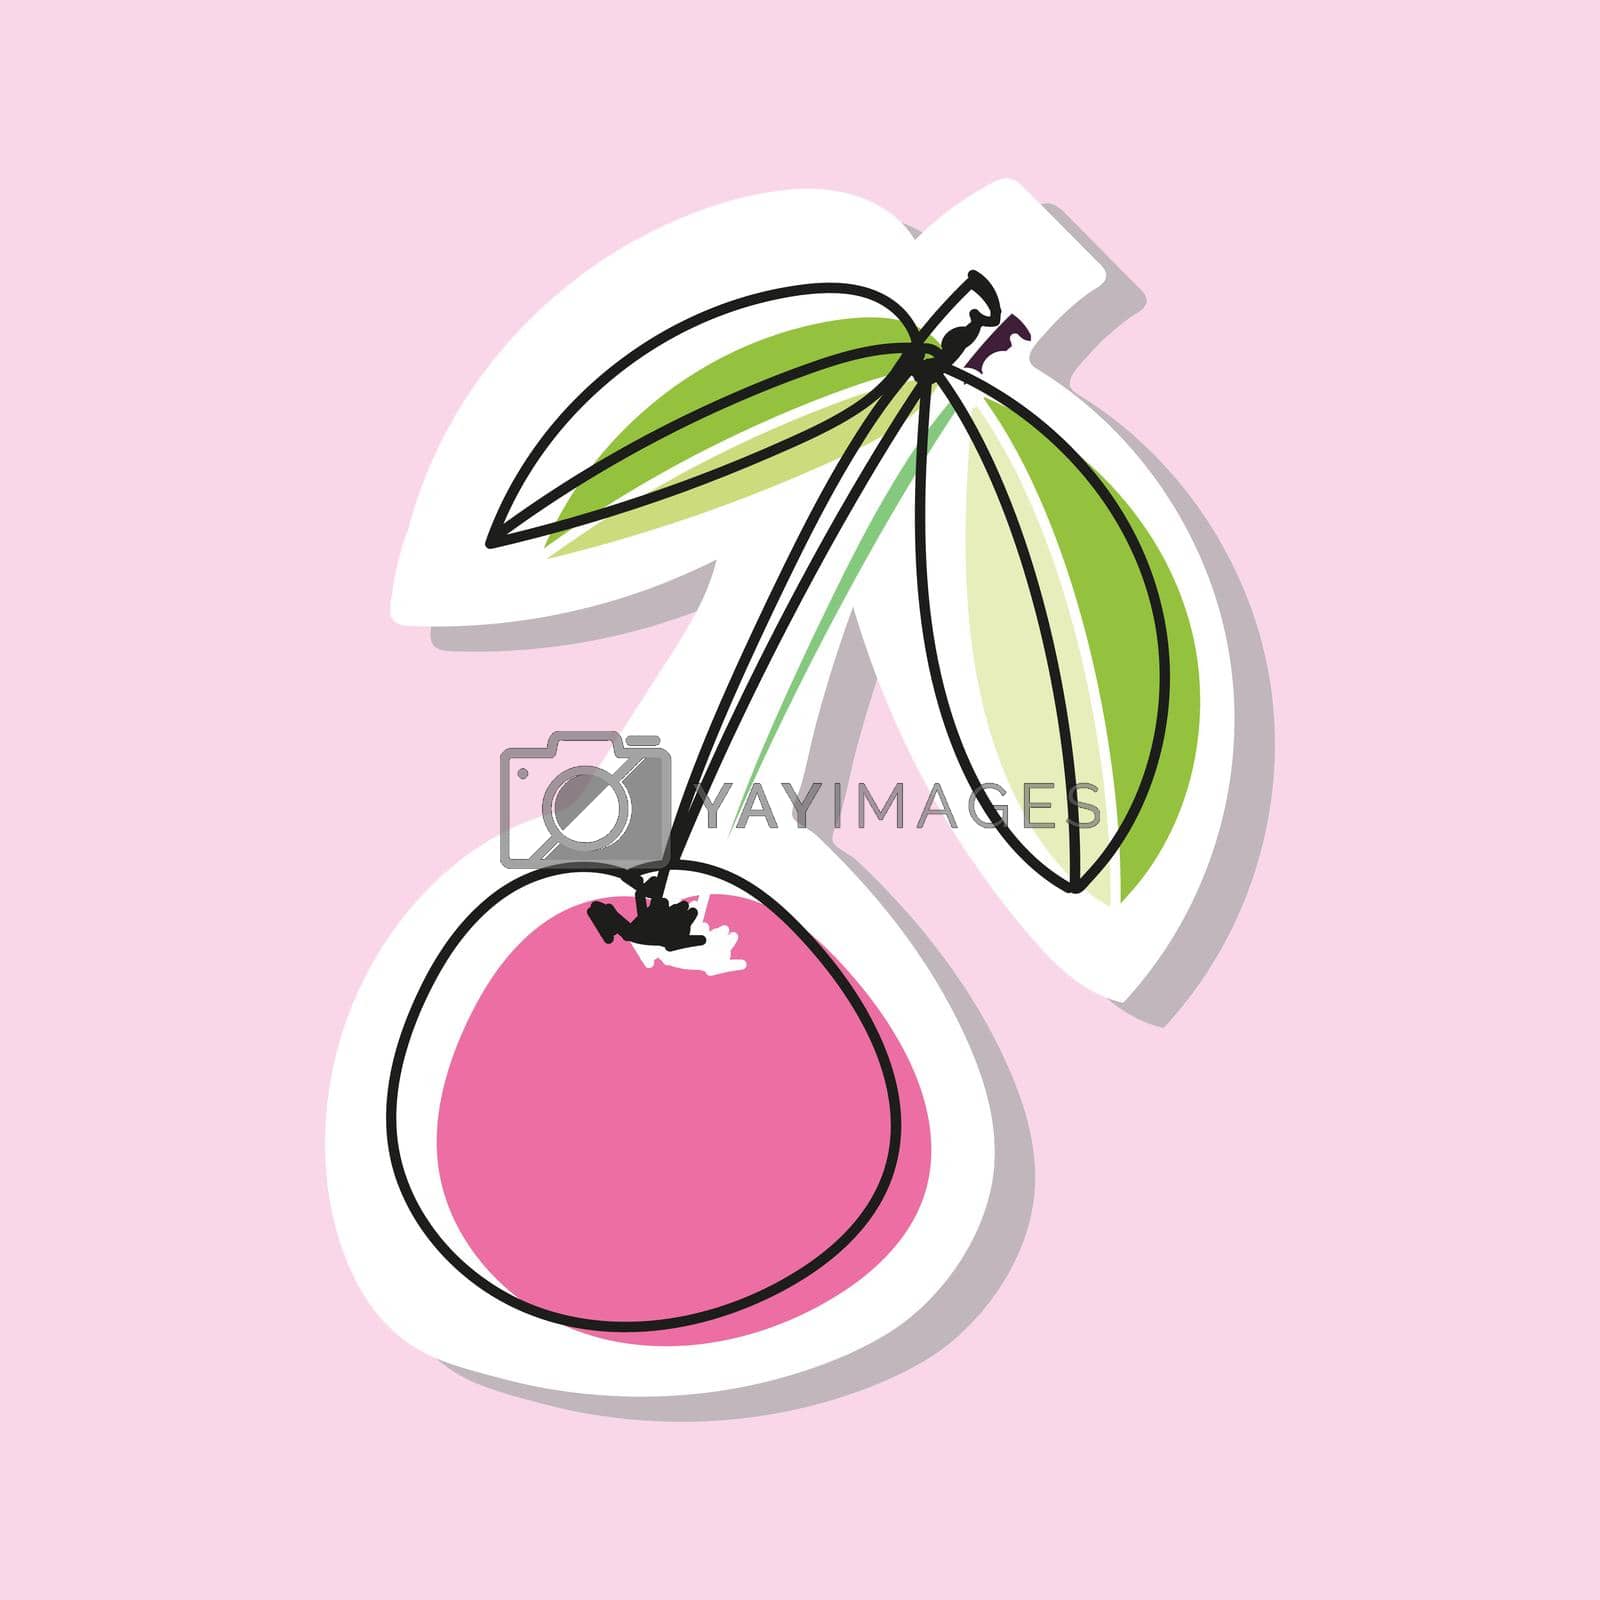 Royalty free image of Vector illustration of cherry or sweet cherry in doodle style. Drawing with an offset outline. by Libe_Sketch